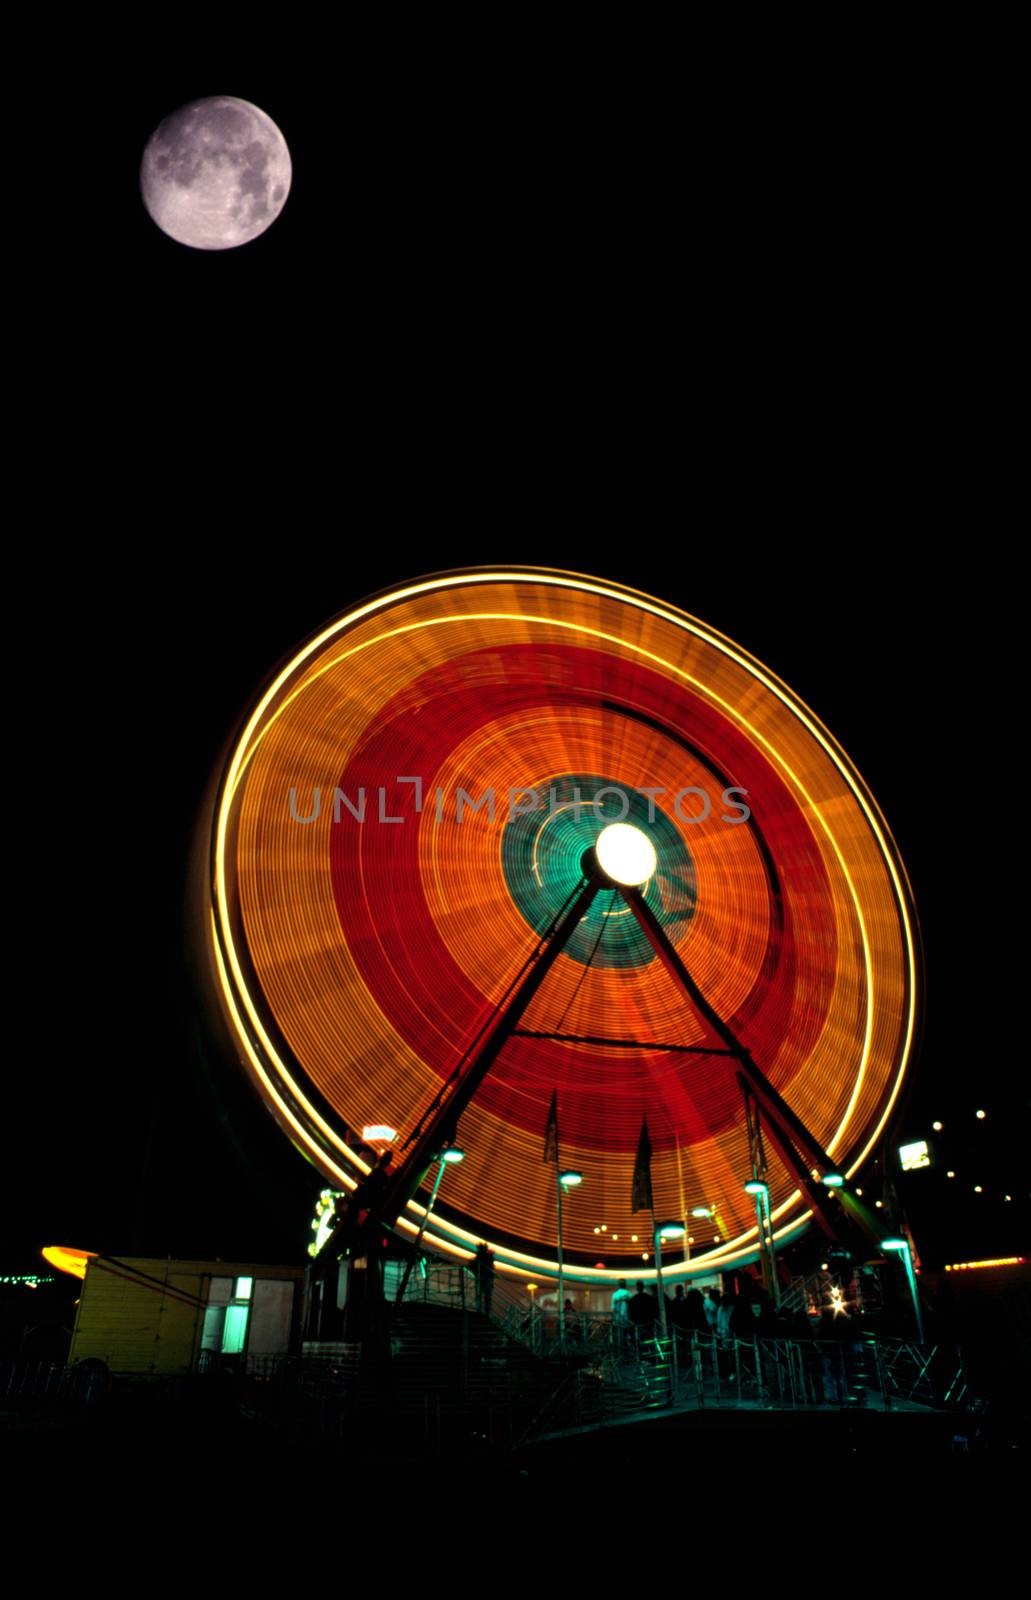 Fair Moon Full Lunar Showing over Local Fair Midway Canival Ride by ChrisBoswell